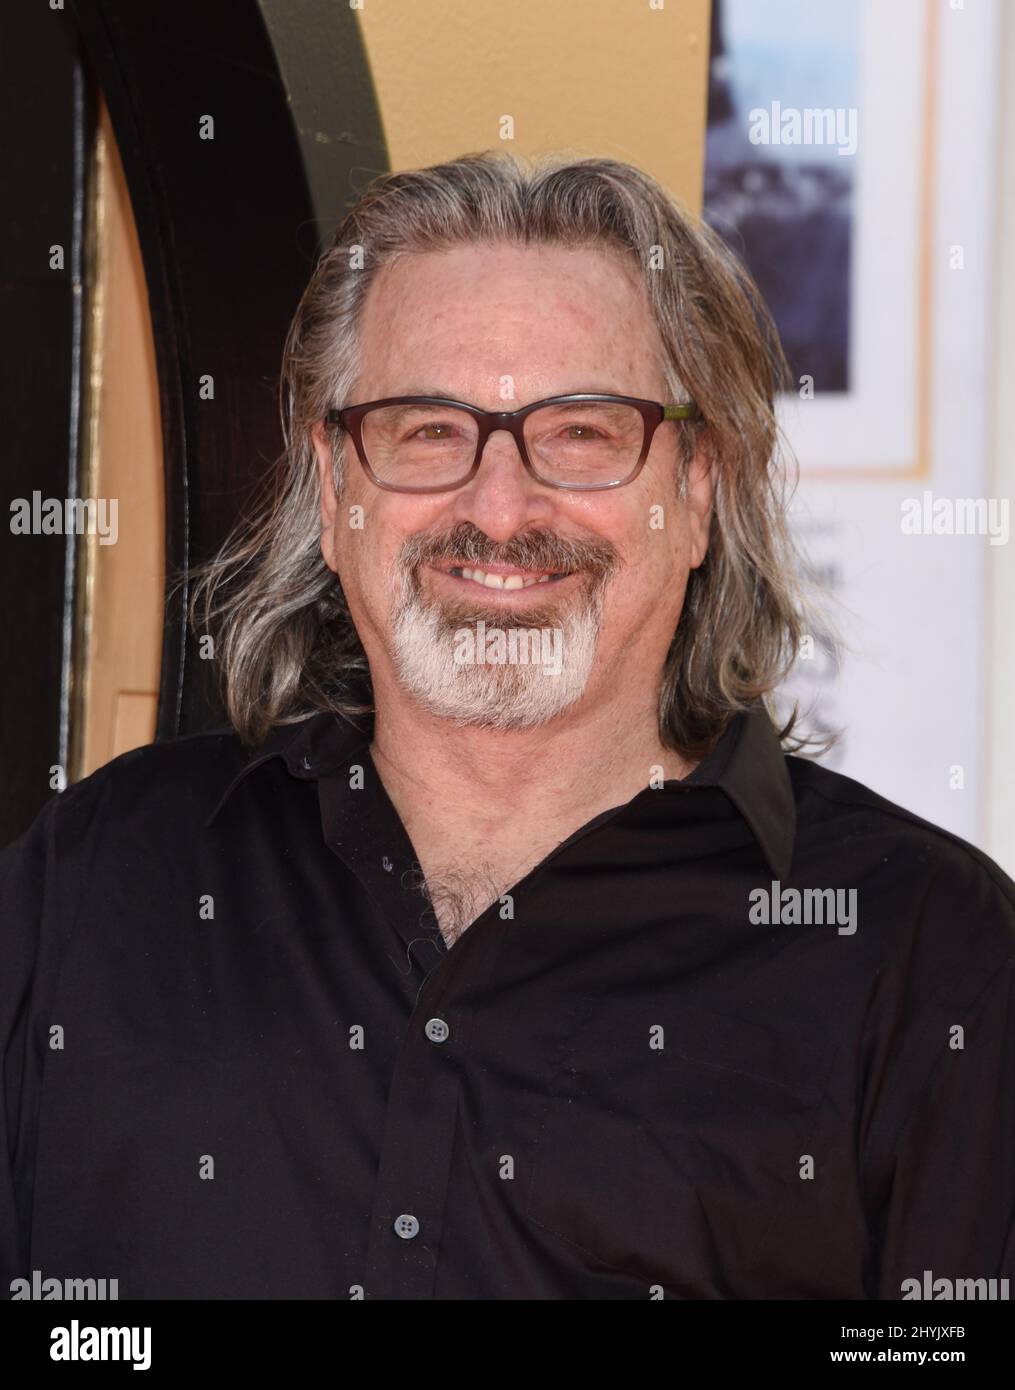 Robert Carradine at the 'Once Upon A Time In Hollywood' Los Angeles Premiere held at the TCL Chinese Theatre on July 22, 2019 in Hollywood, USA. Stock Photo